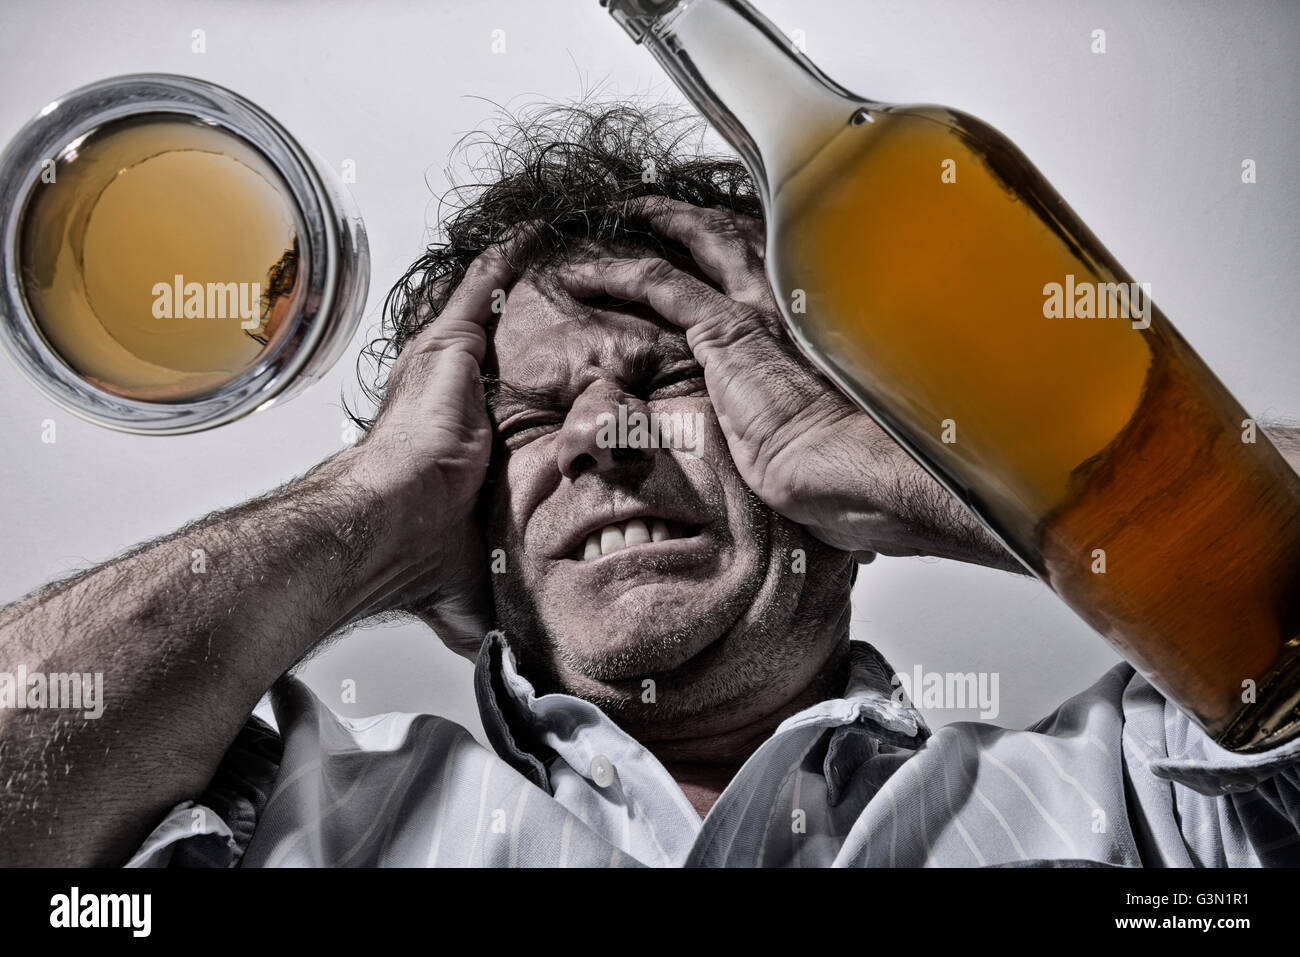 Mature man with alcohol problems Stock Photo